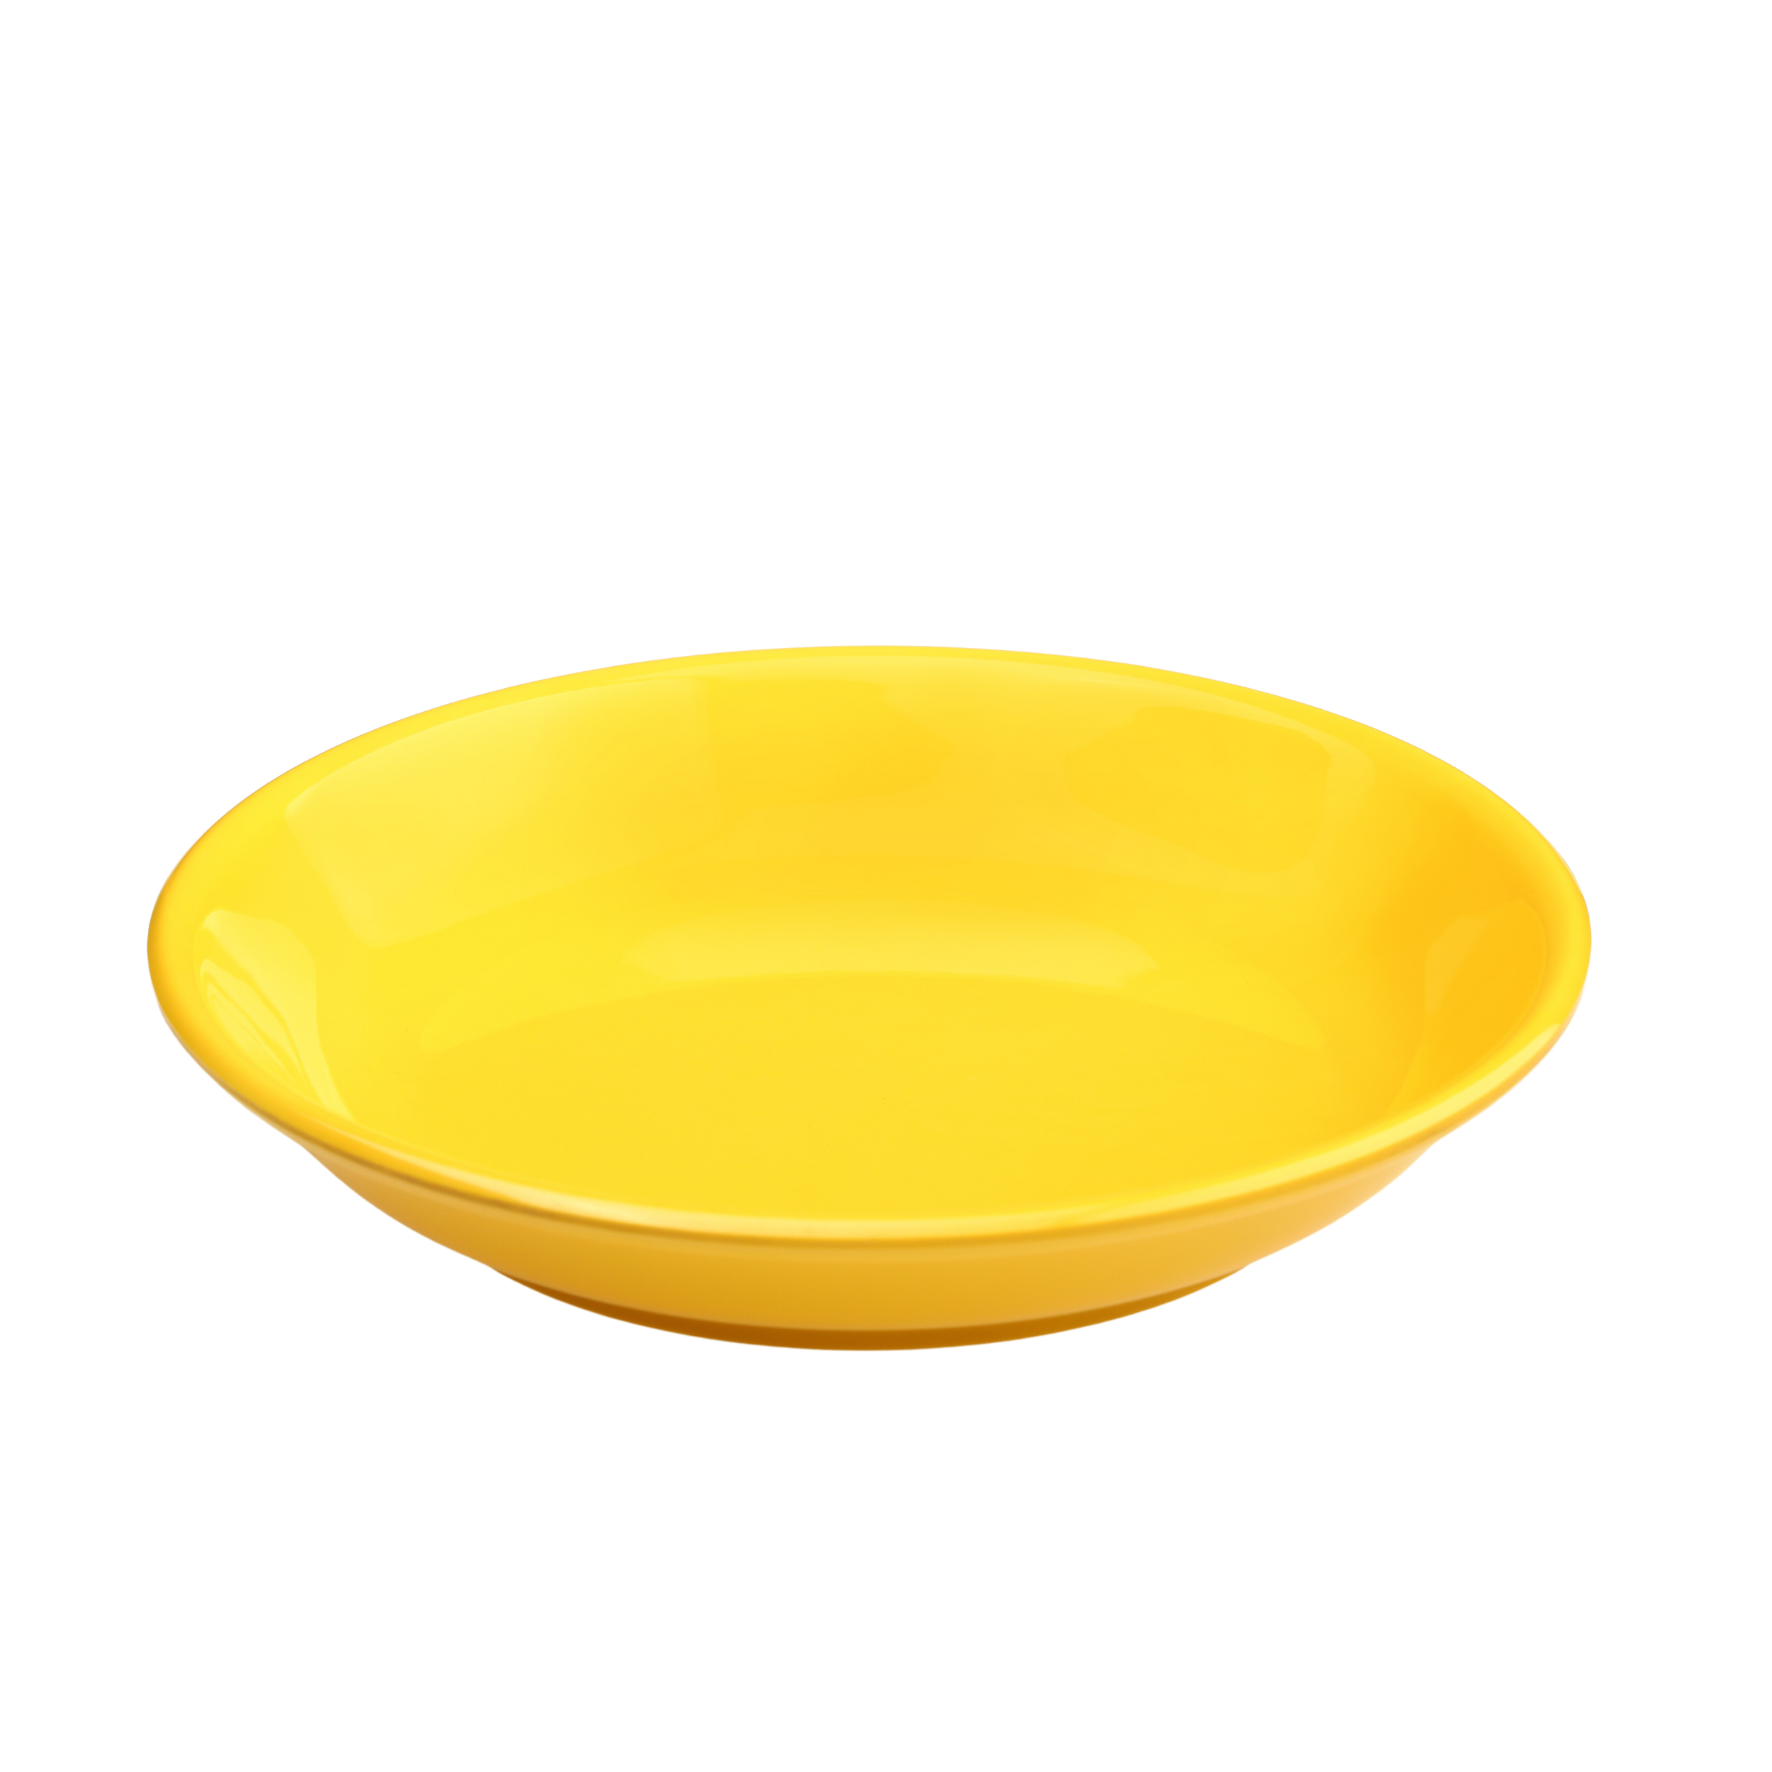 The Plate Story - Snack Plate 6.5” for Toddler - Yellow